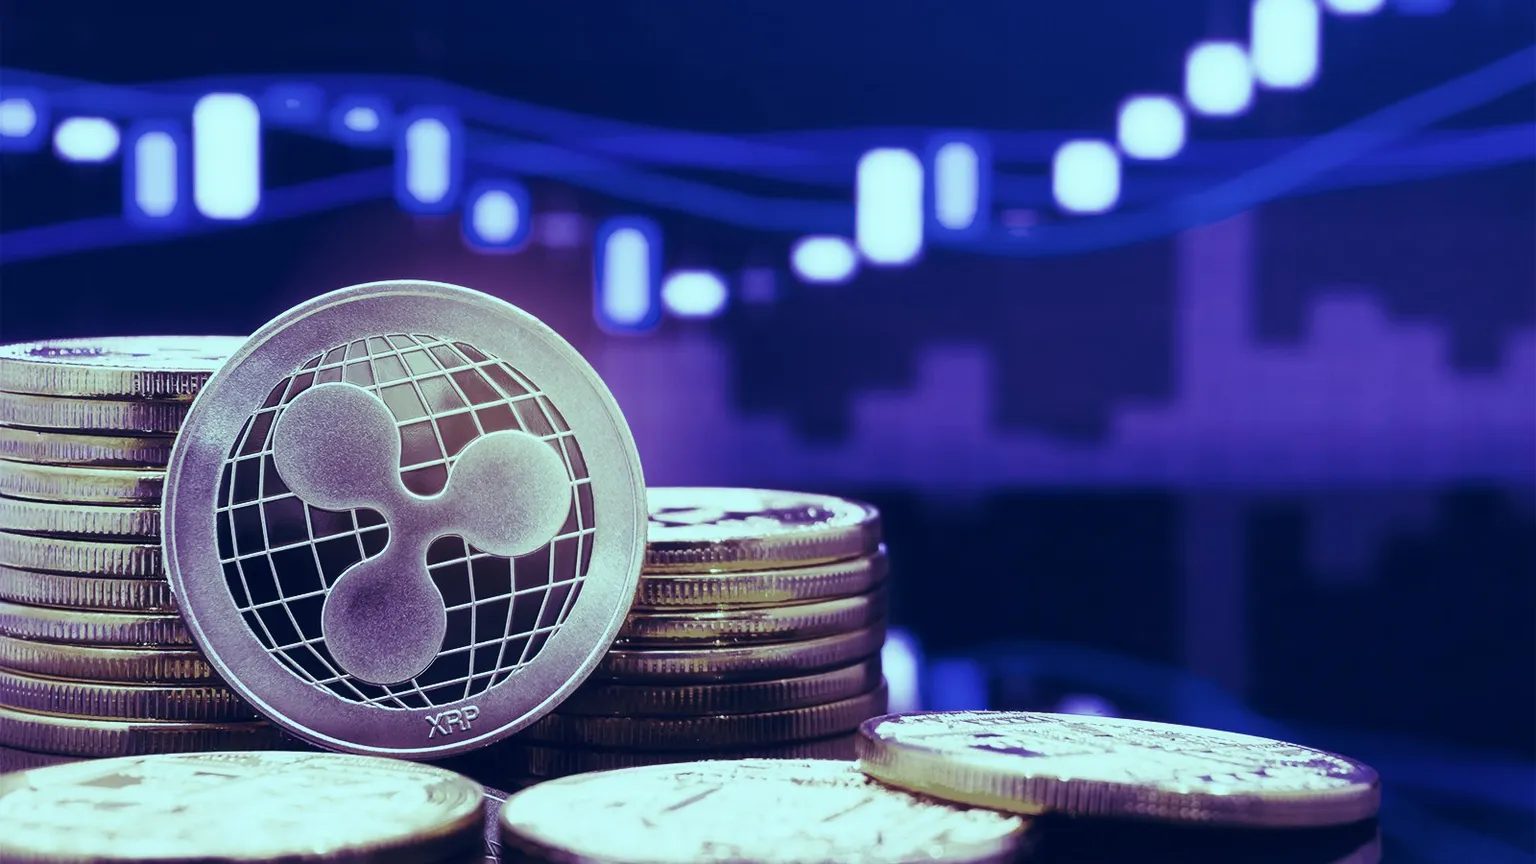 XRP's price is on the up. IMAGE: Shutterstock